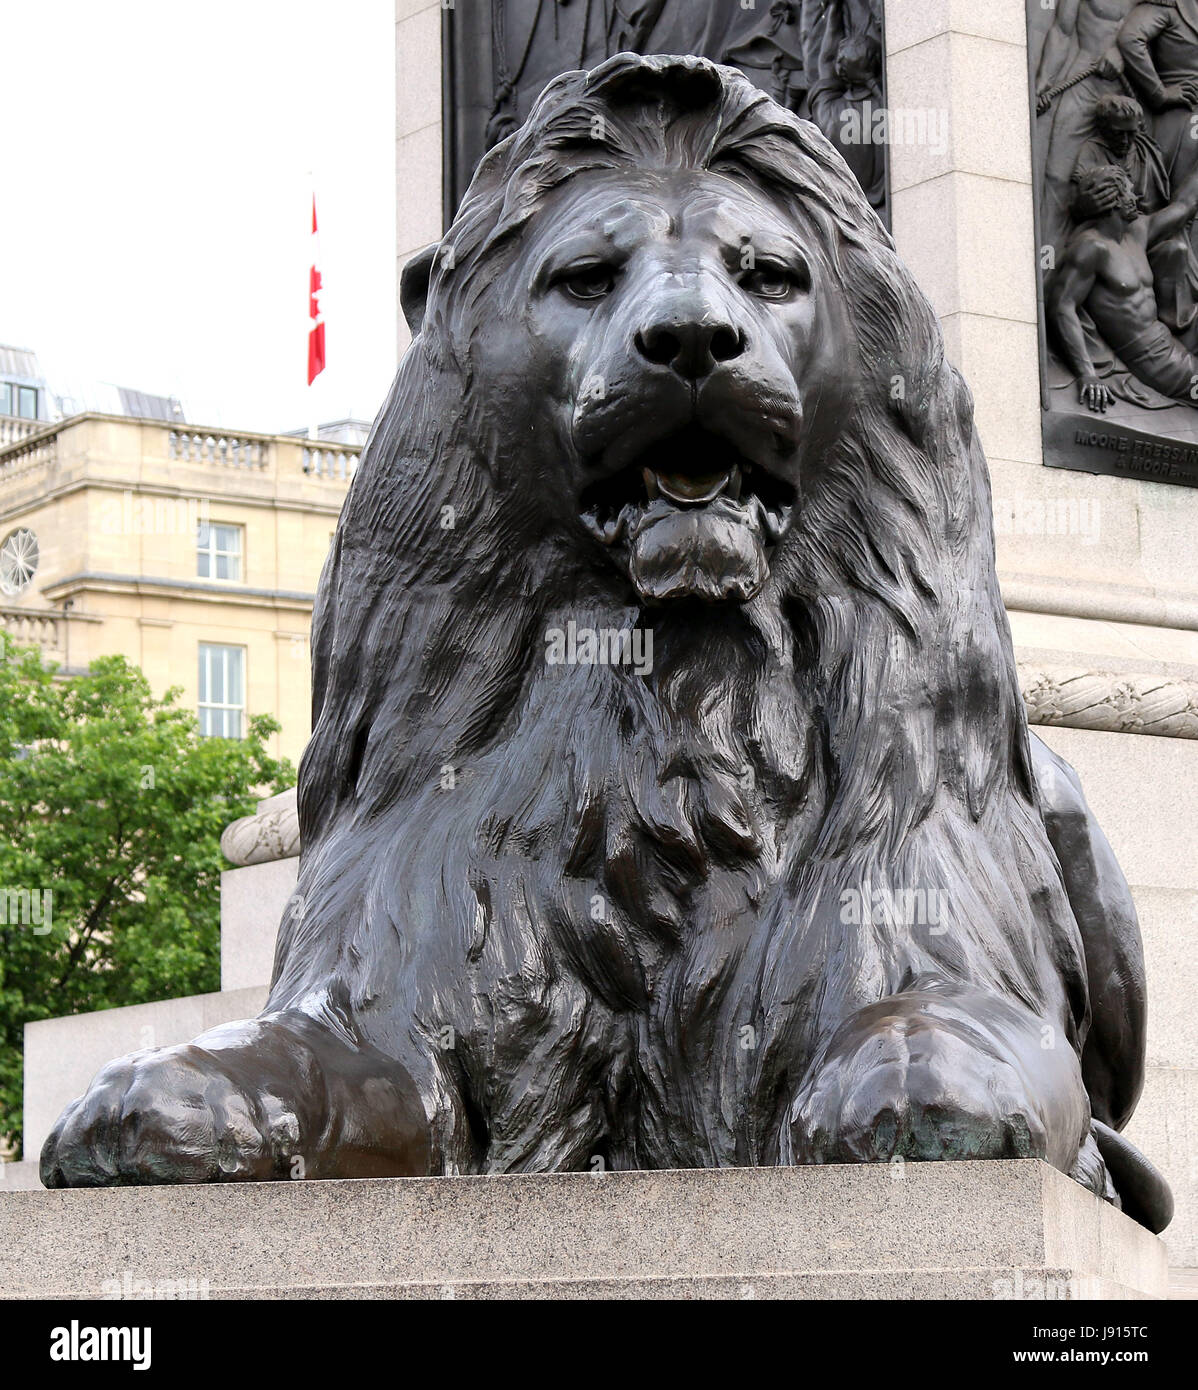 May 30, 2017 - One of the statues of four lions in Trafalgar Square, surrounding Nelson's Column, which are commonly known as the ÔLandseer LionsÕ aft Stock Photo